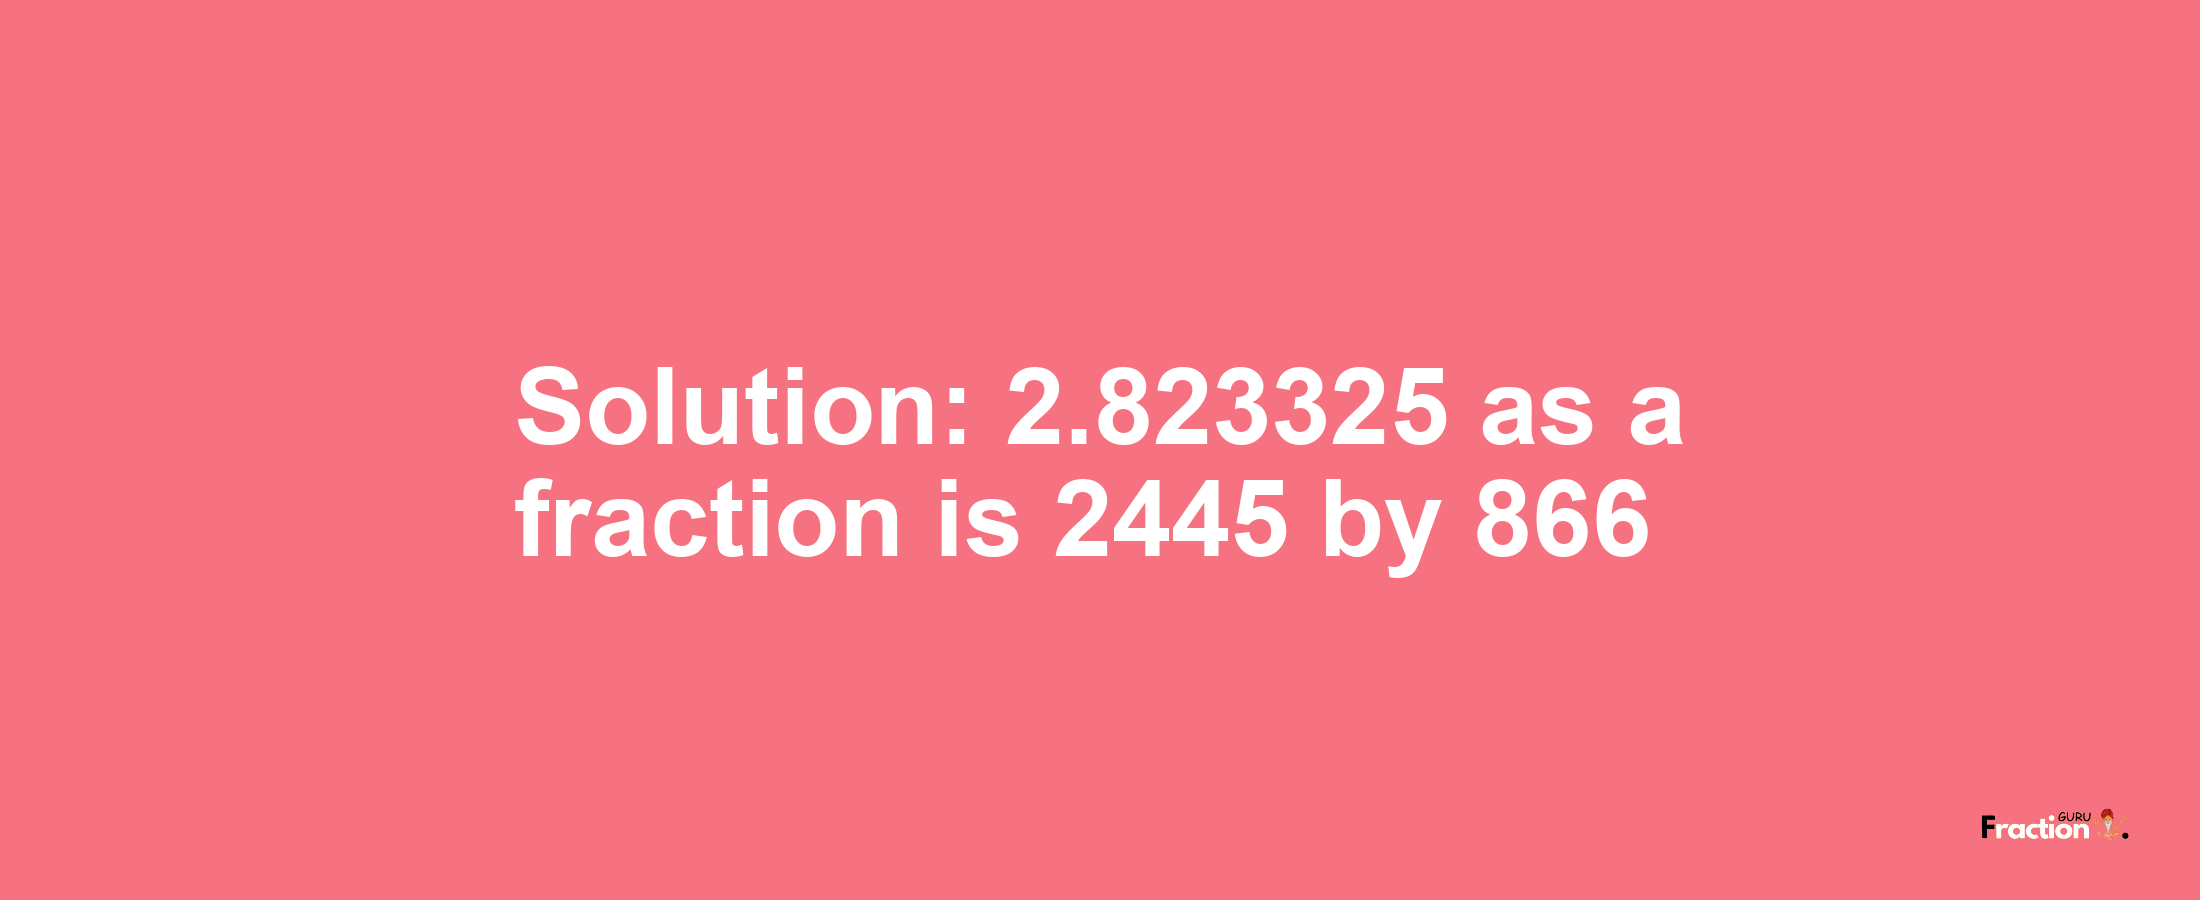 Solution:2.823325 as a fraction is 2445/866